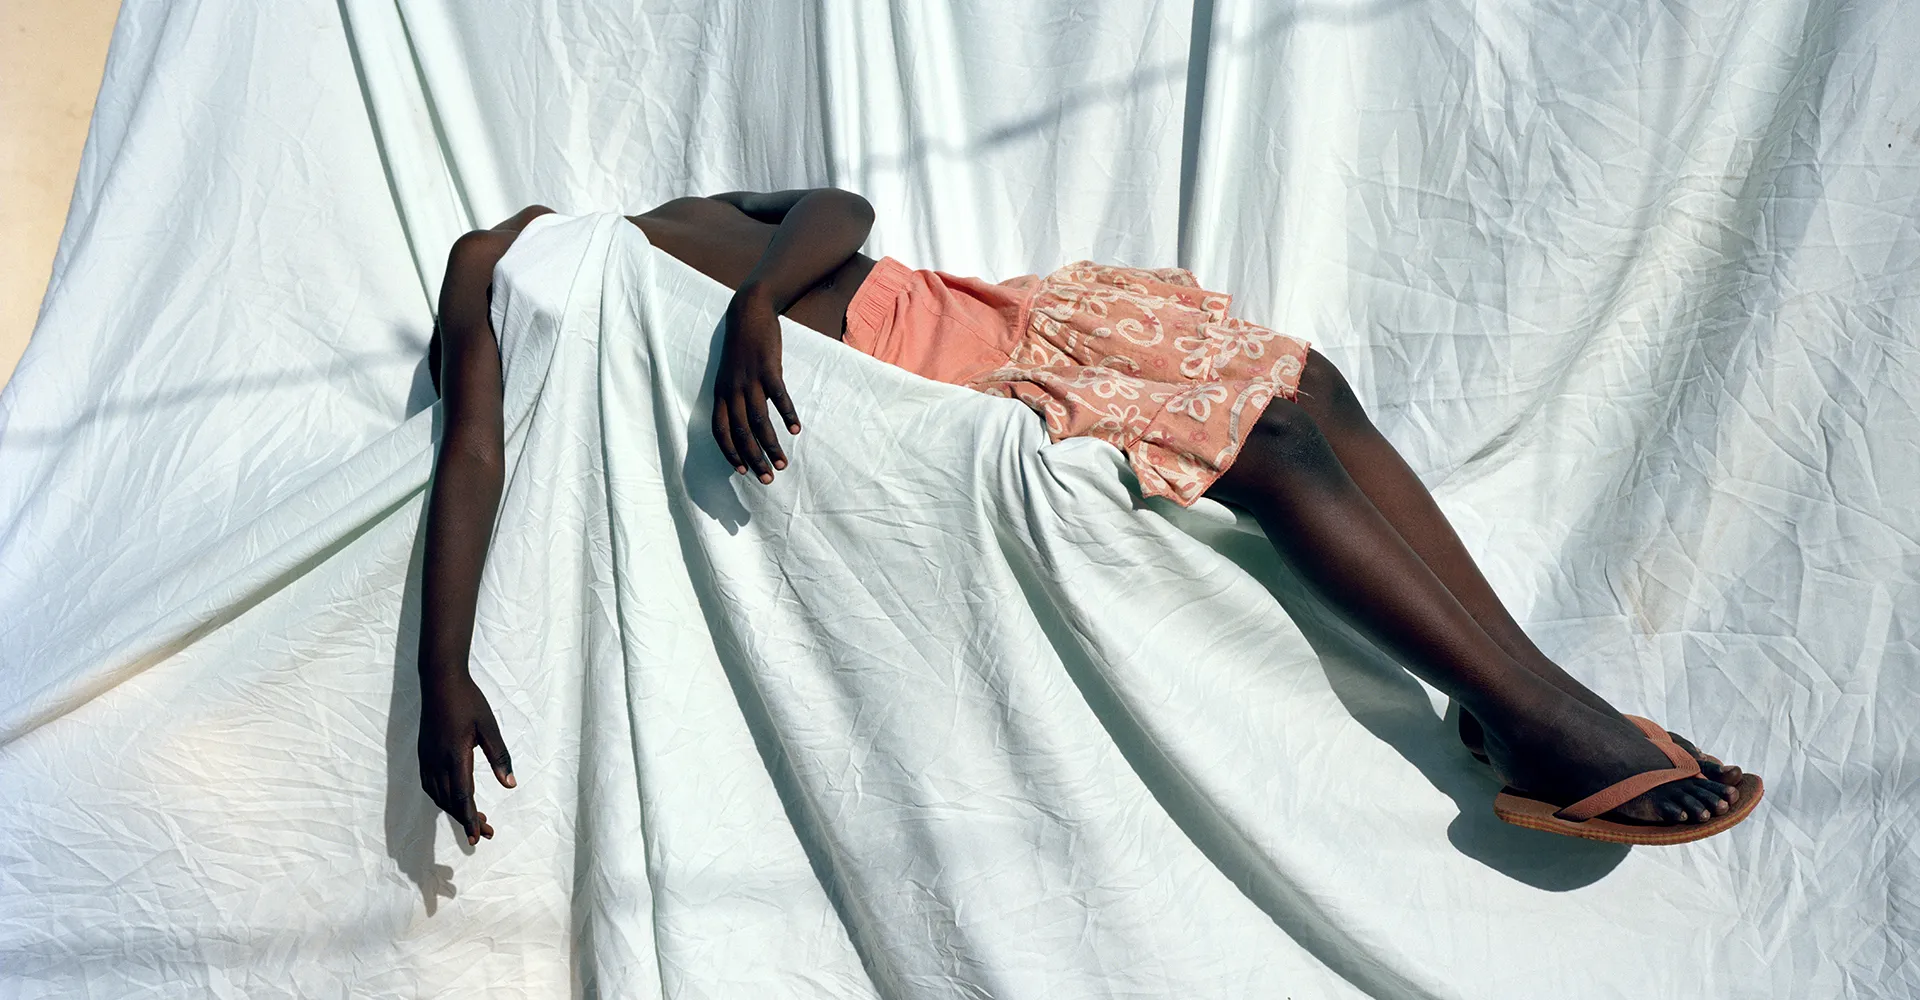 An eye for the uncanny: Viviane Sassen on her concurrent exhibition with  Lee Miller